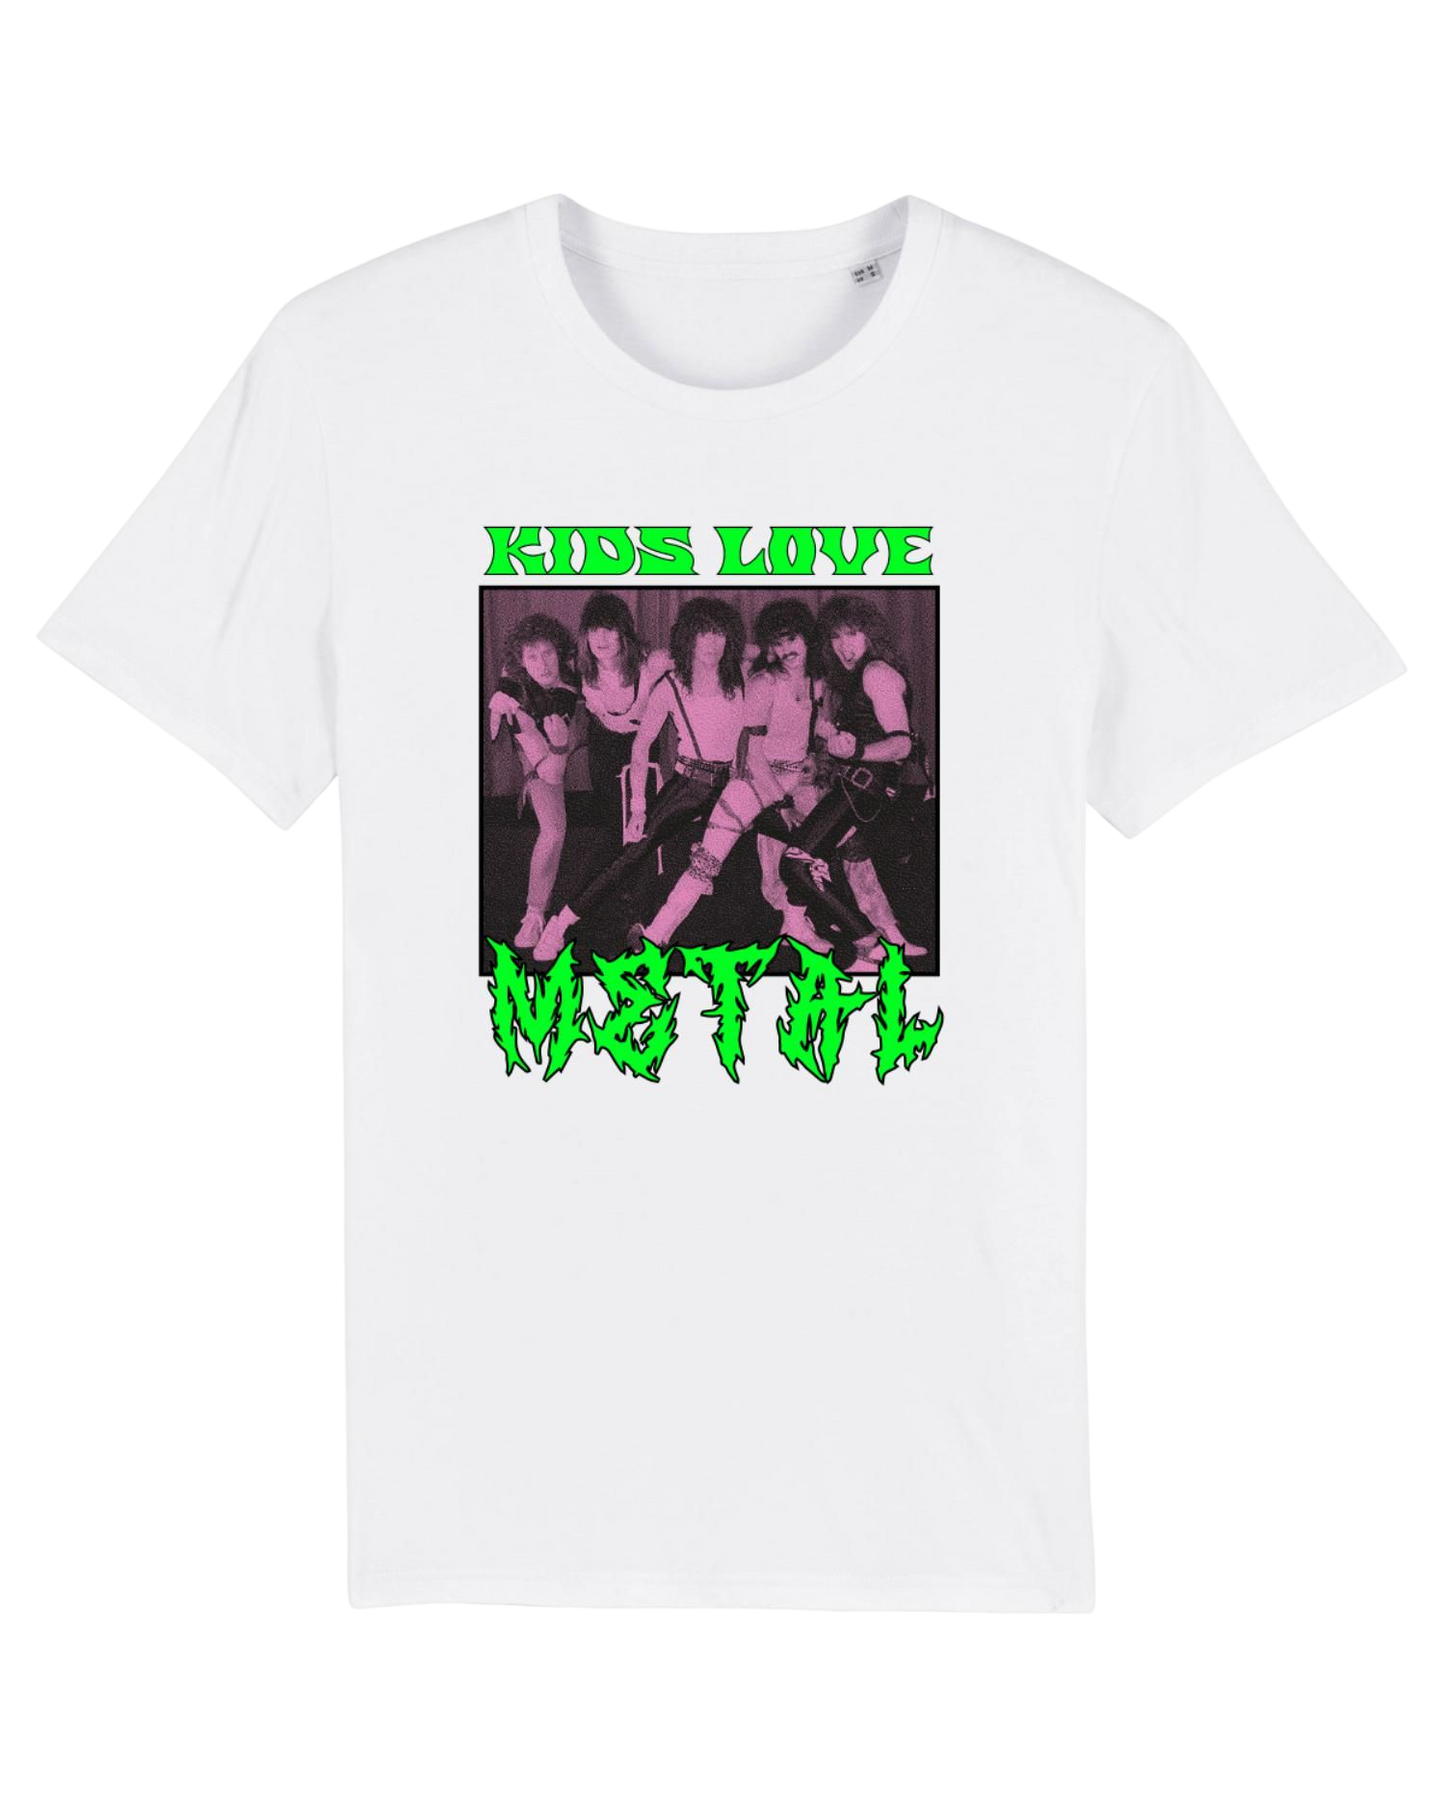 Kids love Metal White Tee by Family Store